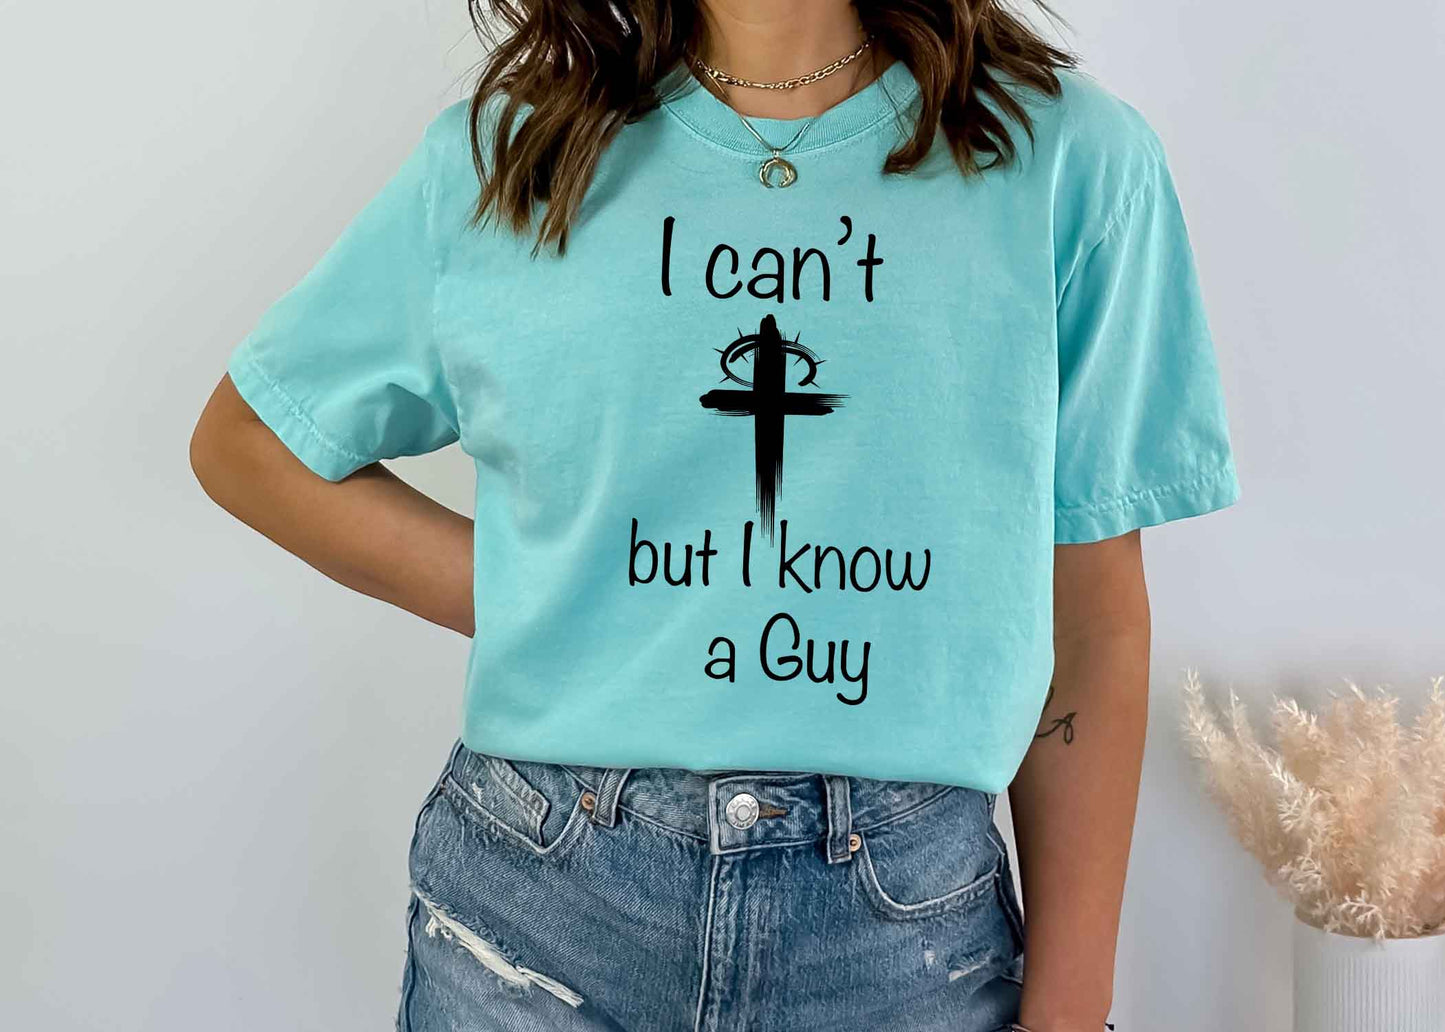 I can’t but I know a guy shirt